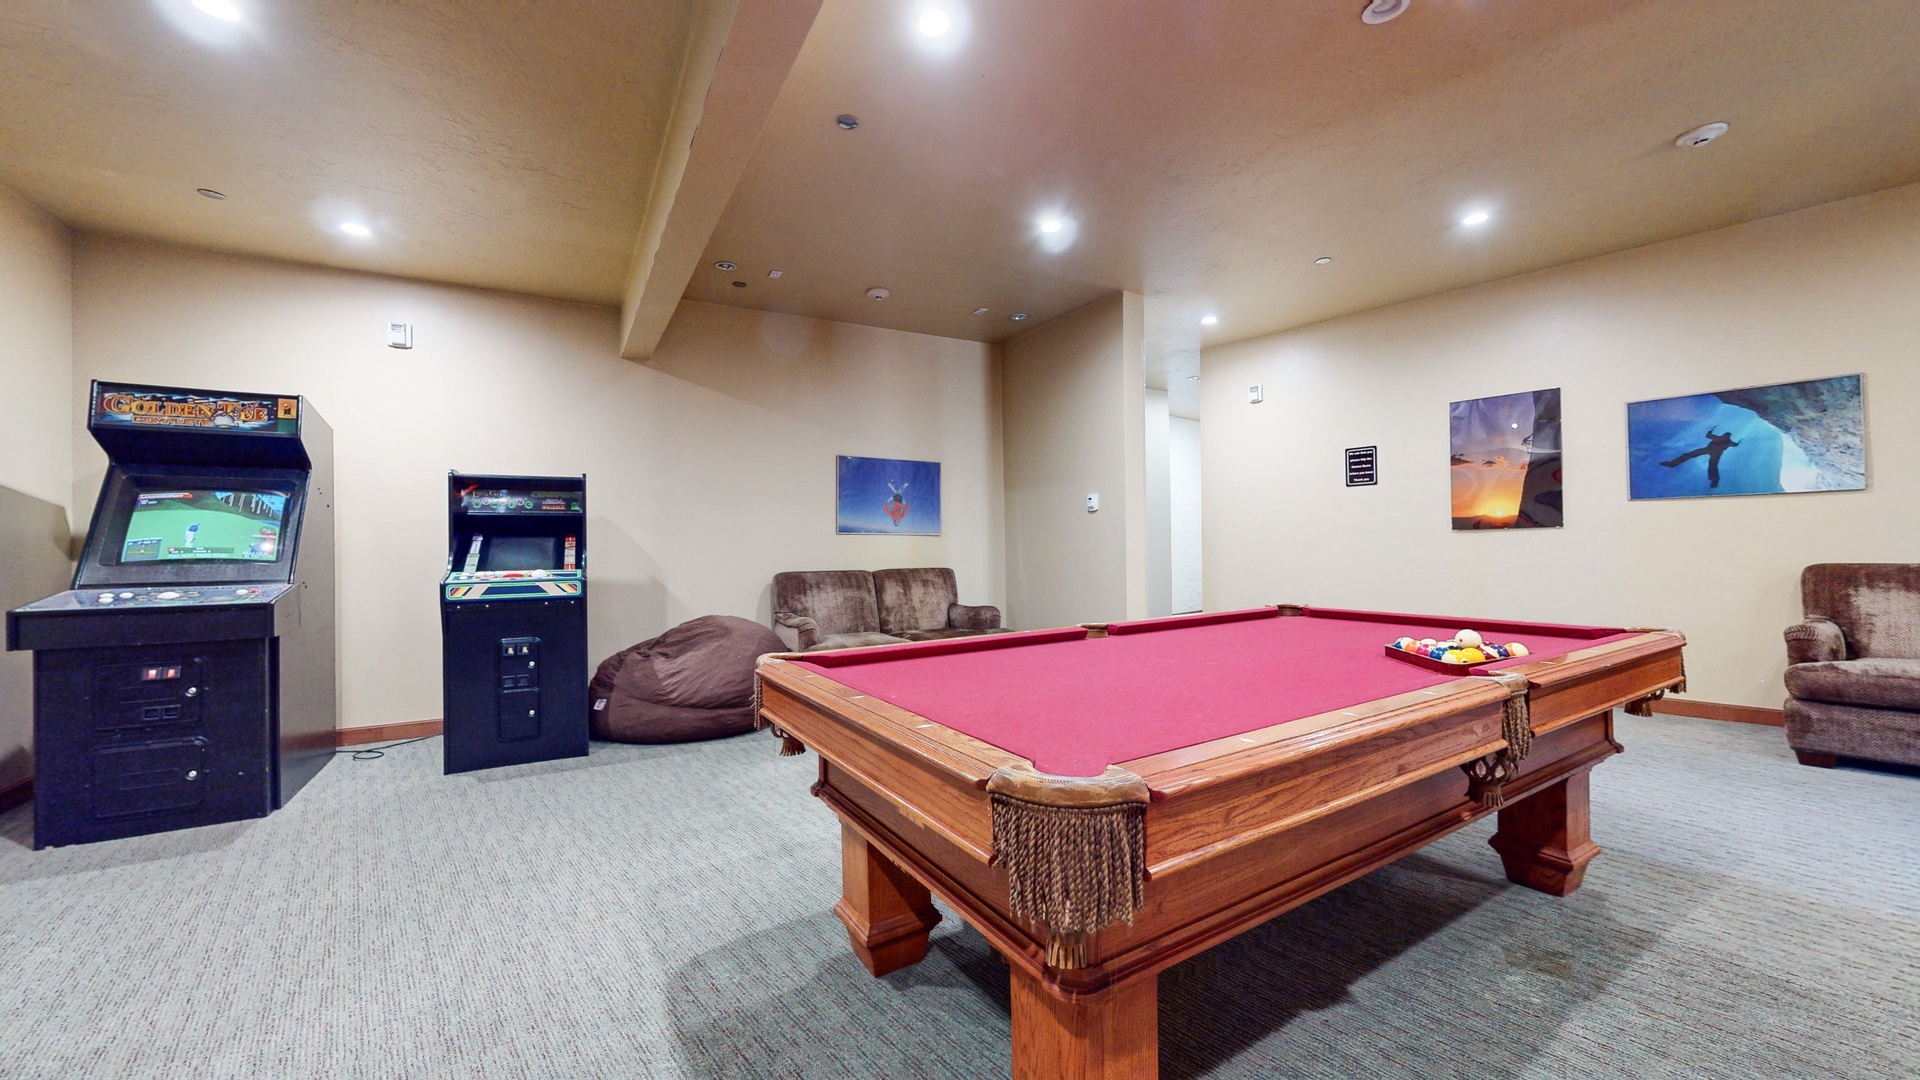 Clubhouse amenities